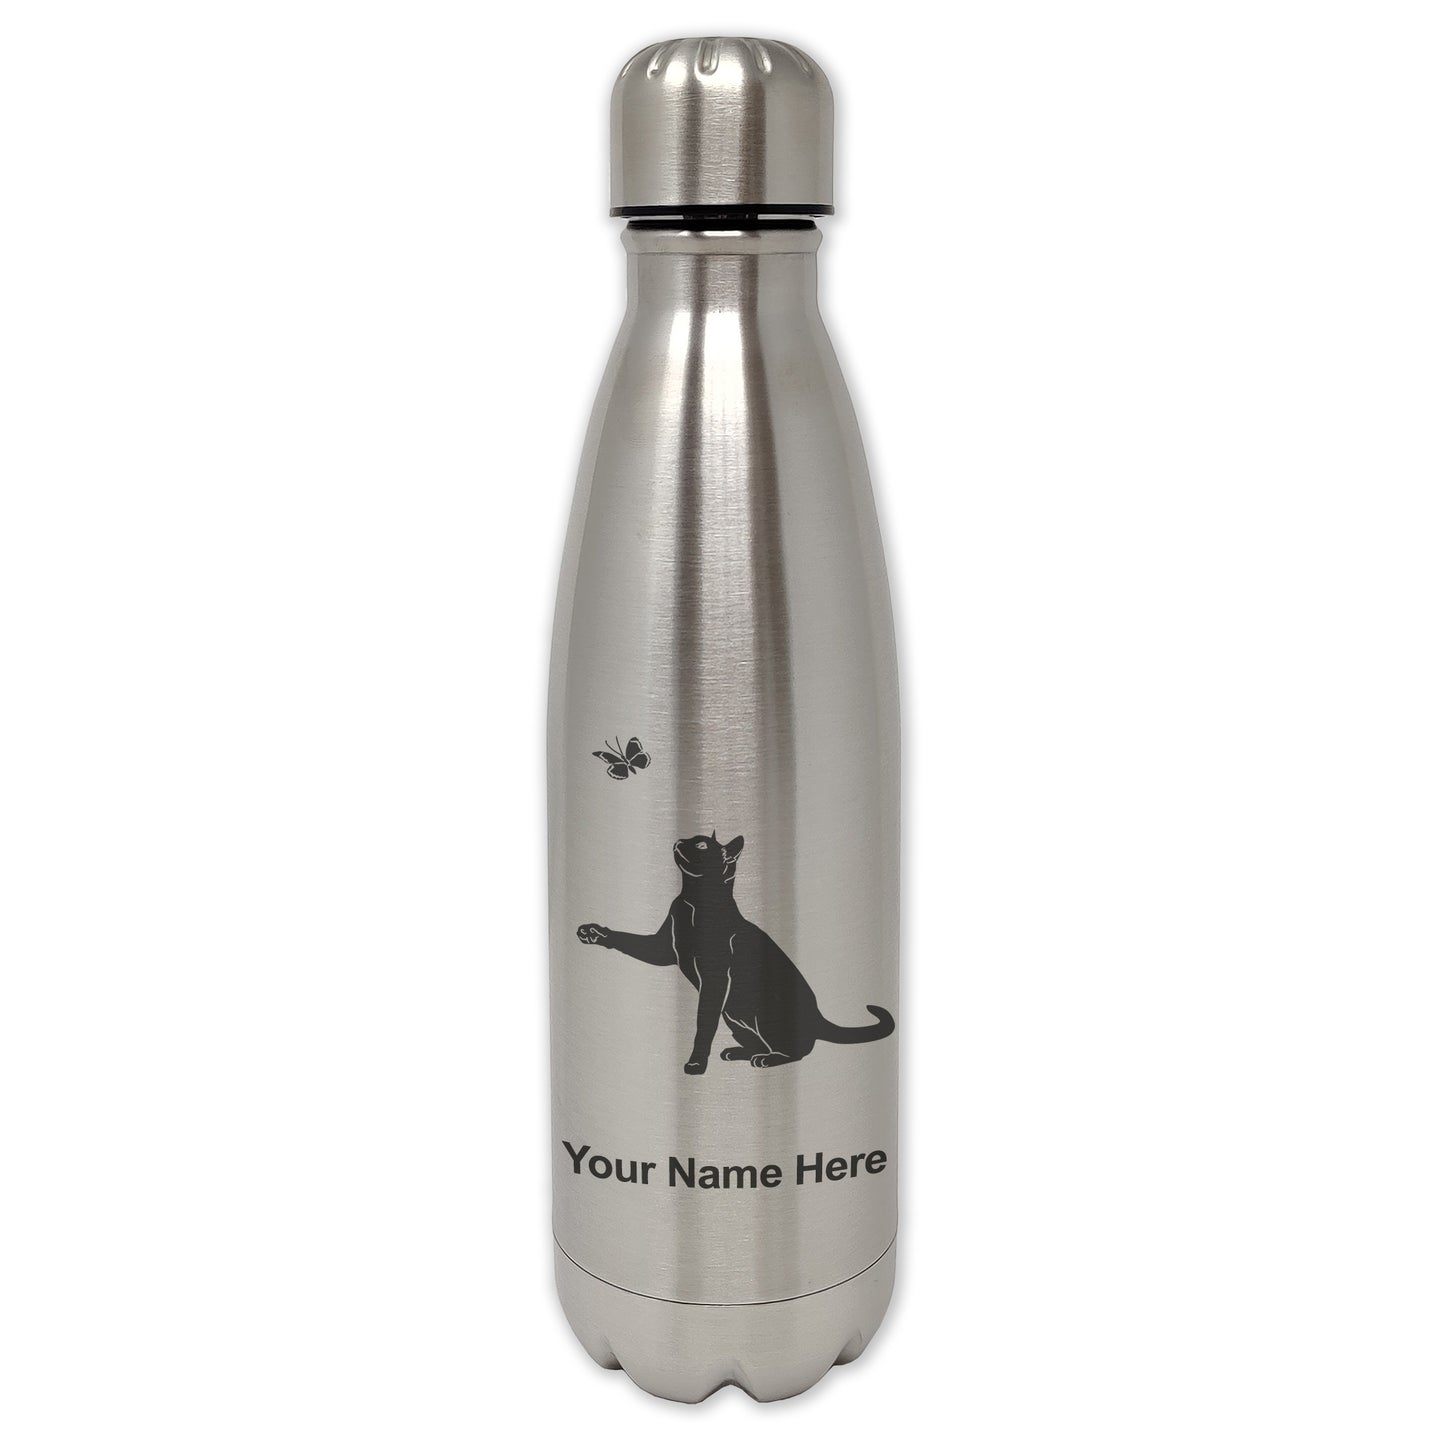 LaserGram Single Wall Water Bottle, Cat with Butterfly, Personalized Engraving Included